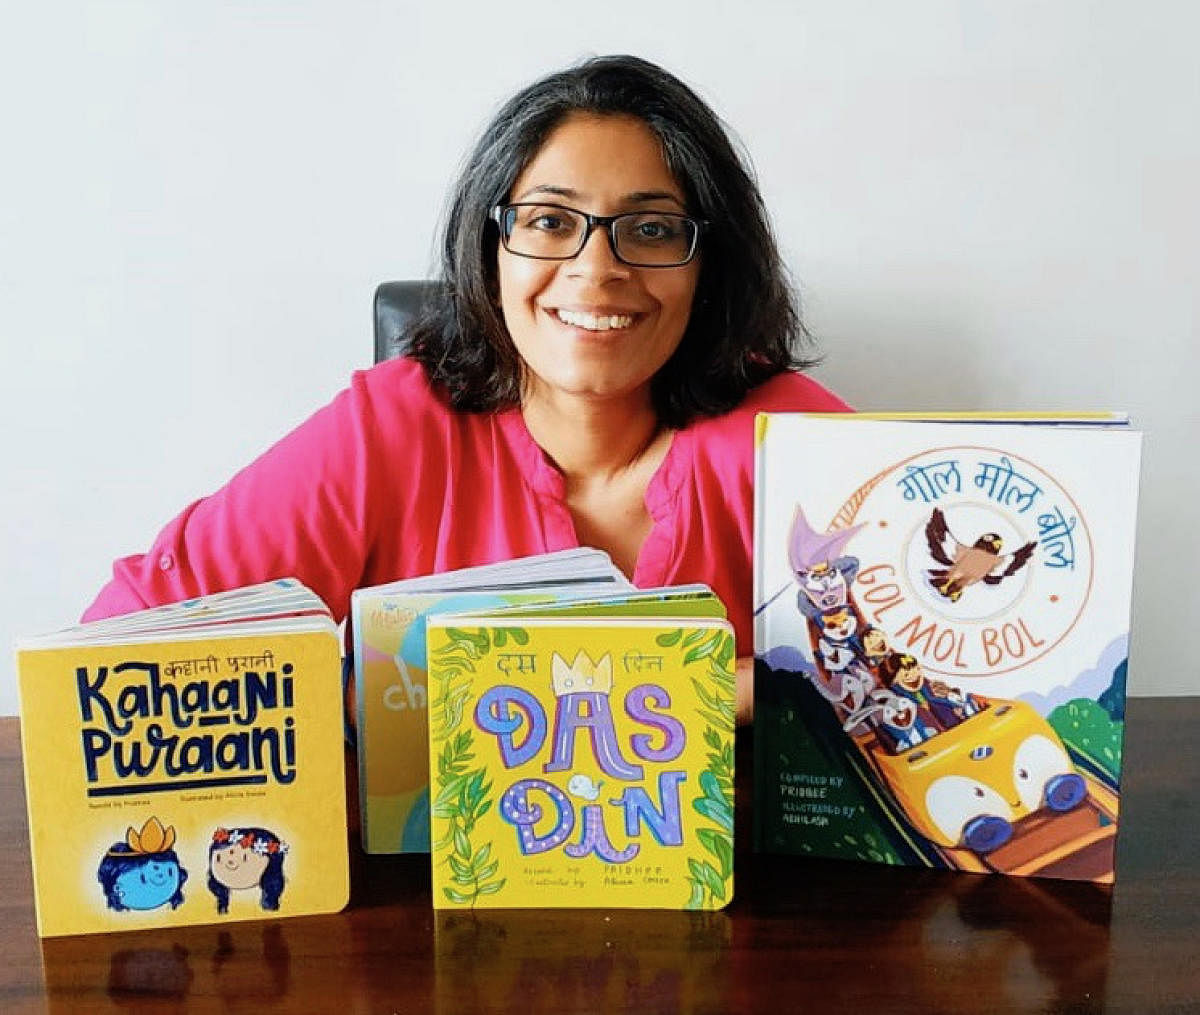 Introducing Indian languages to children through interactive storybooks